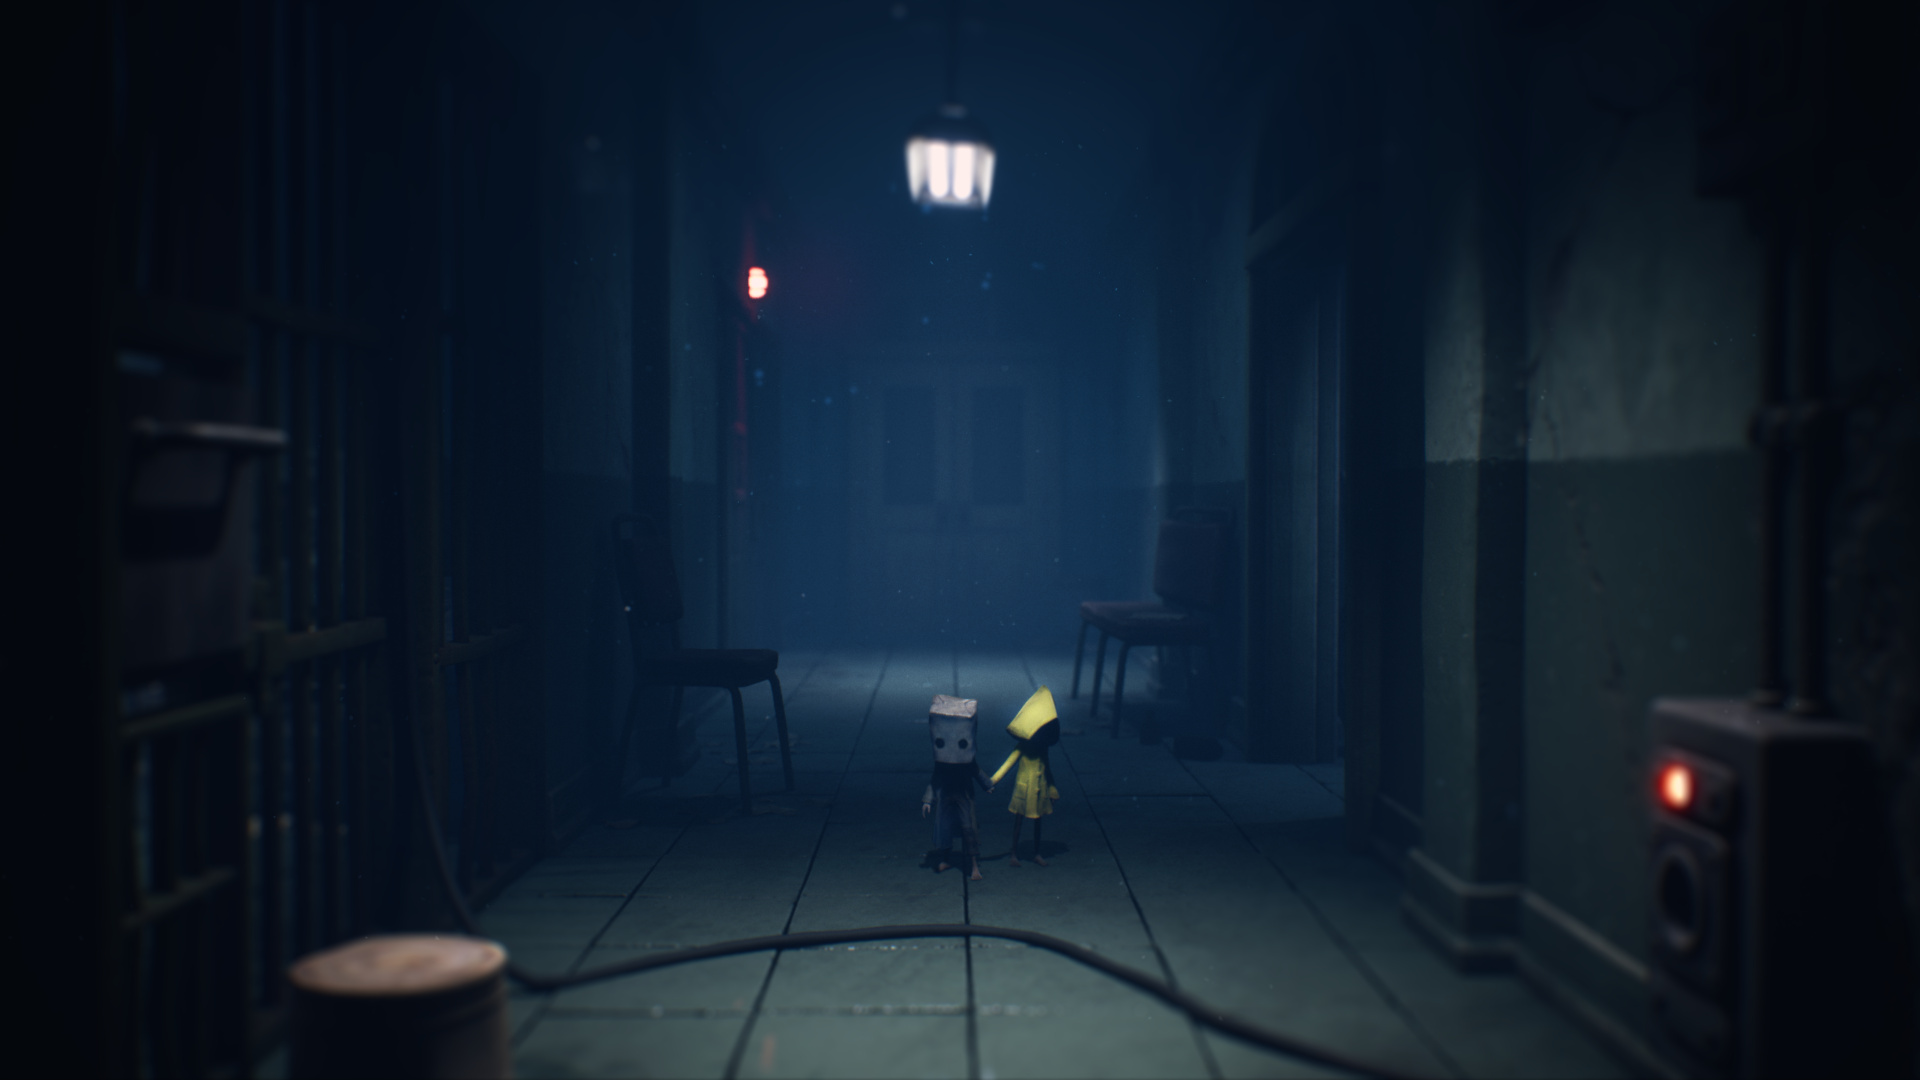 Little Nightmares II (PS4 / PlayStation 4) Game Profile | News, Reviews